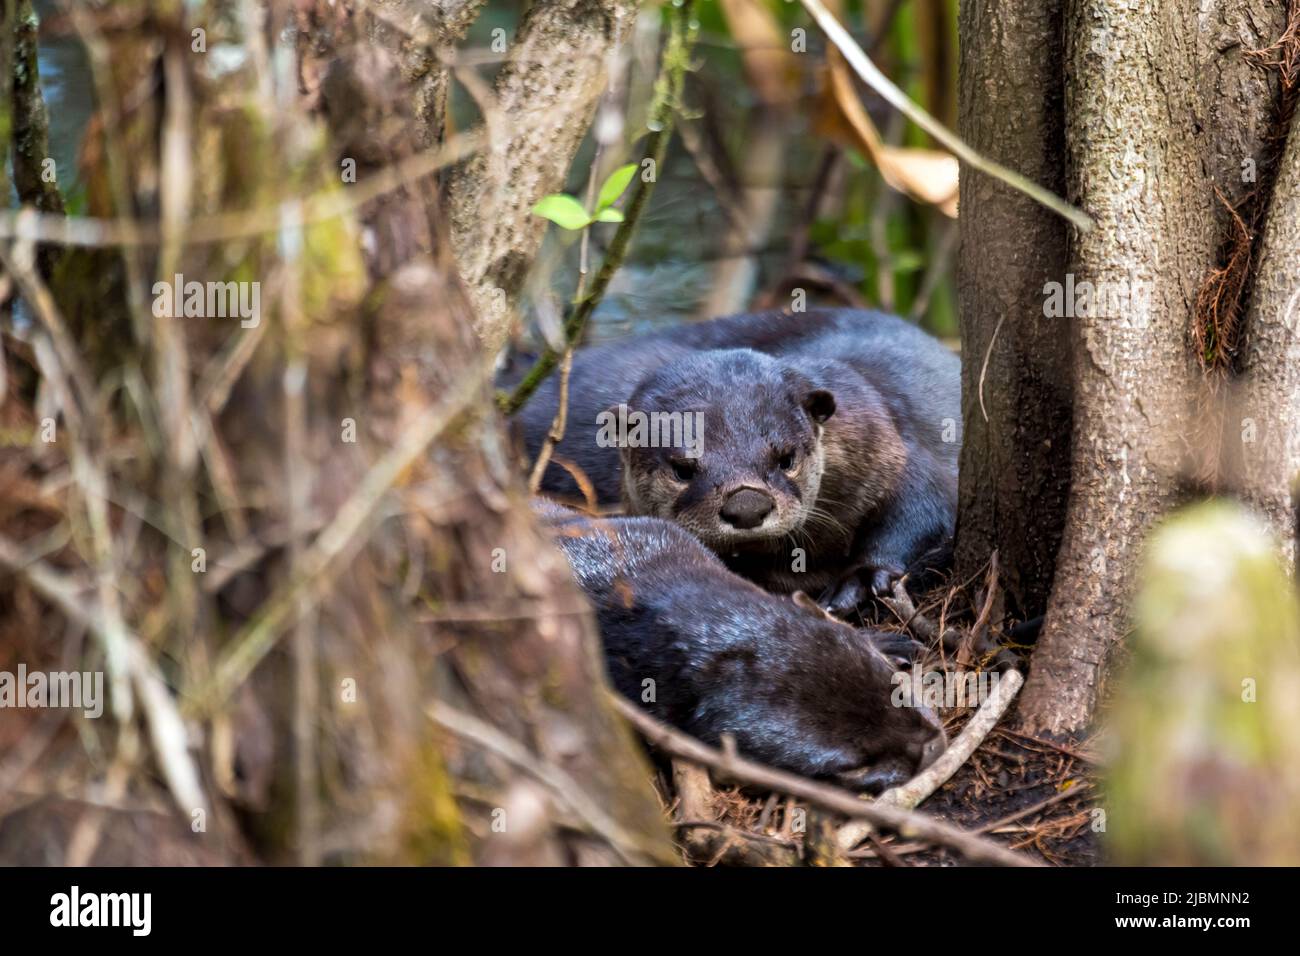 Naples, Florida. Corkscrew swamp sanctuary. A pair of River Otters, (Lutra canadensis) resting in the swamp. Stock Photo